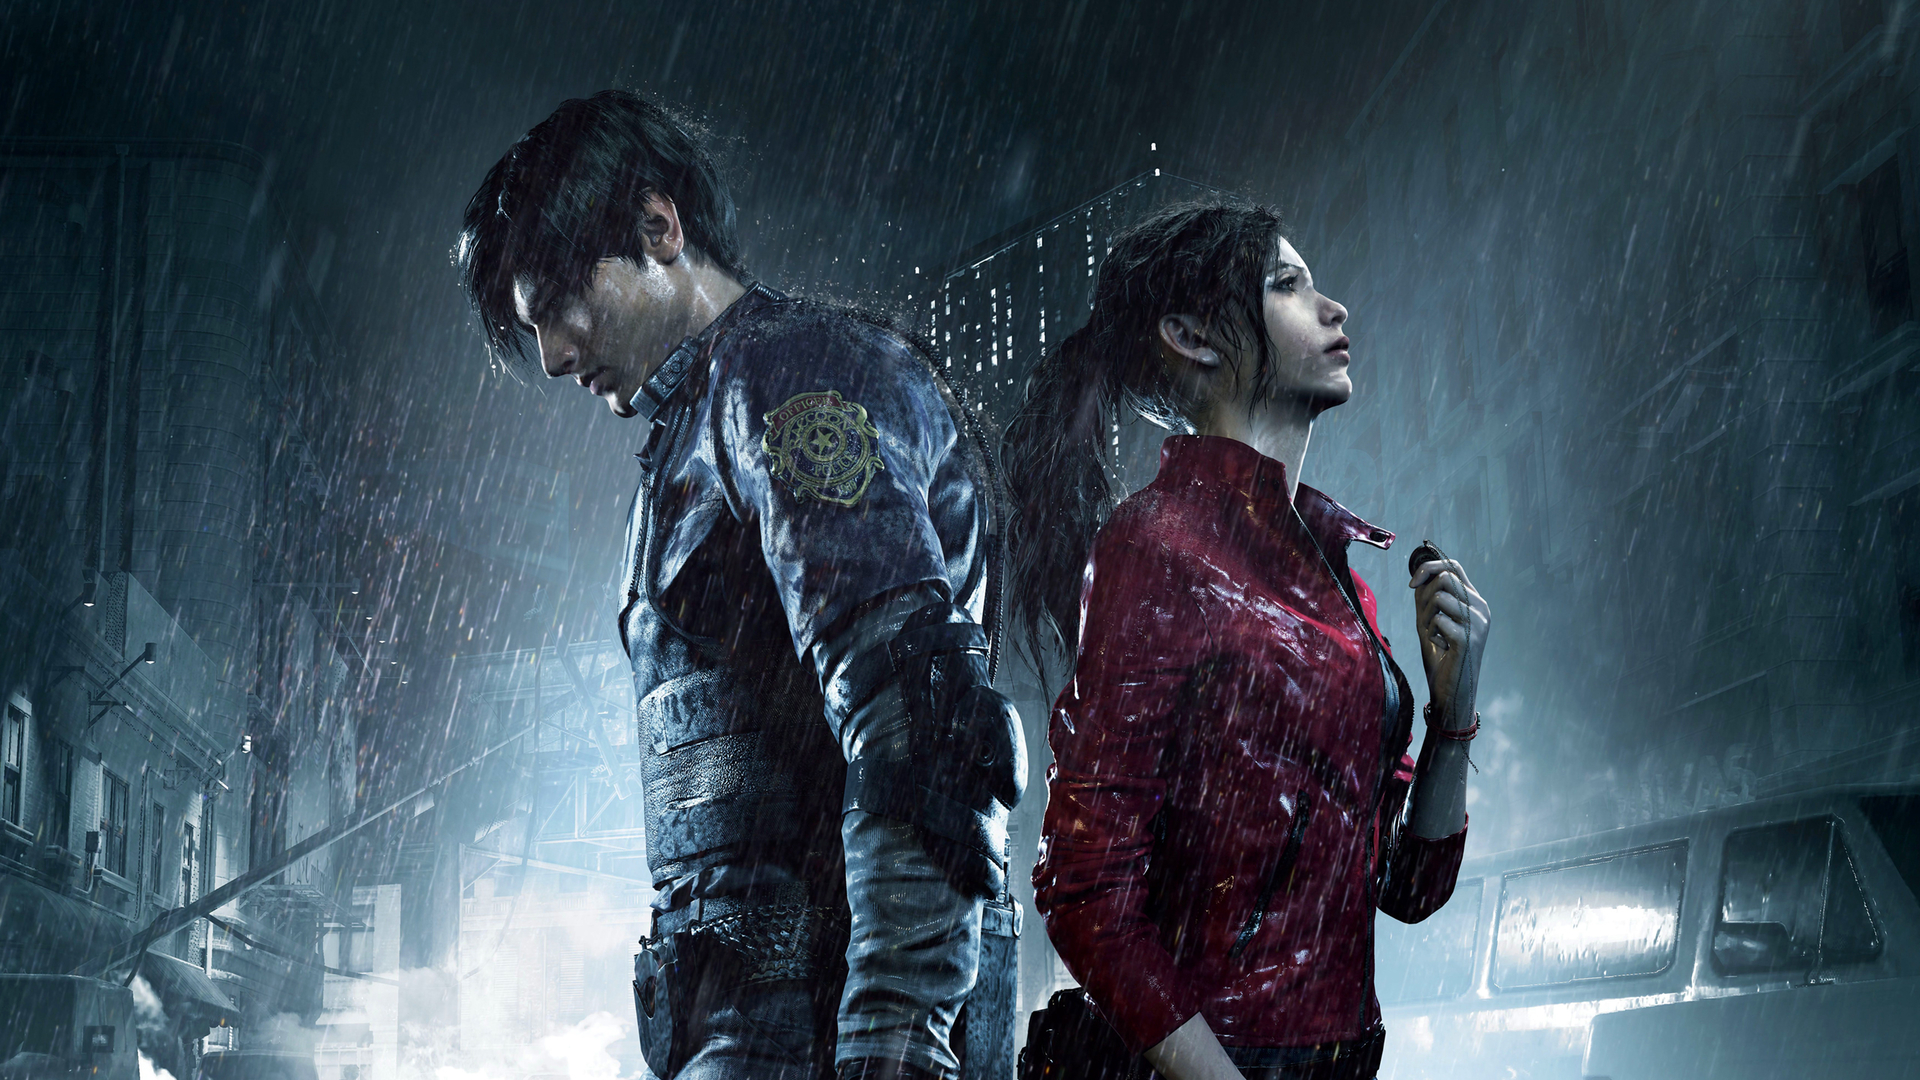 Resident Evil 2 - Leon and Claire in the rain